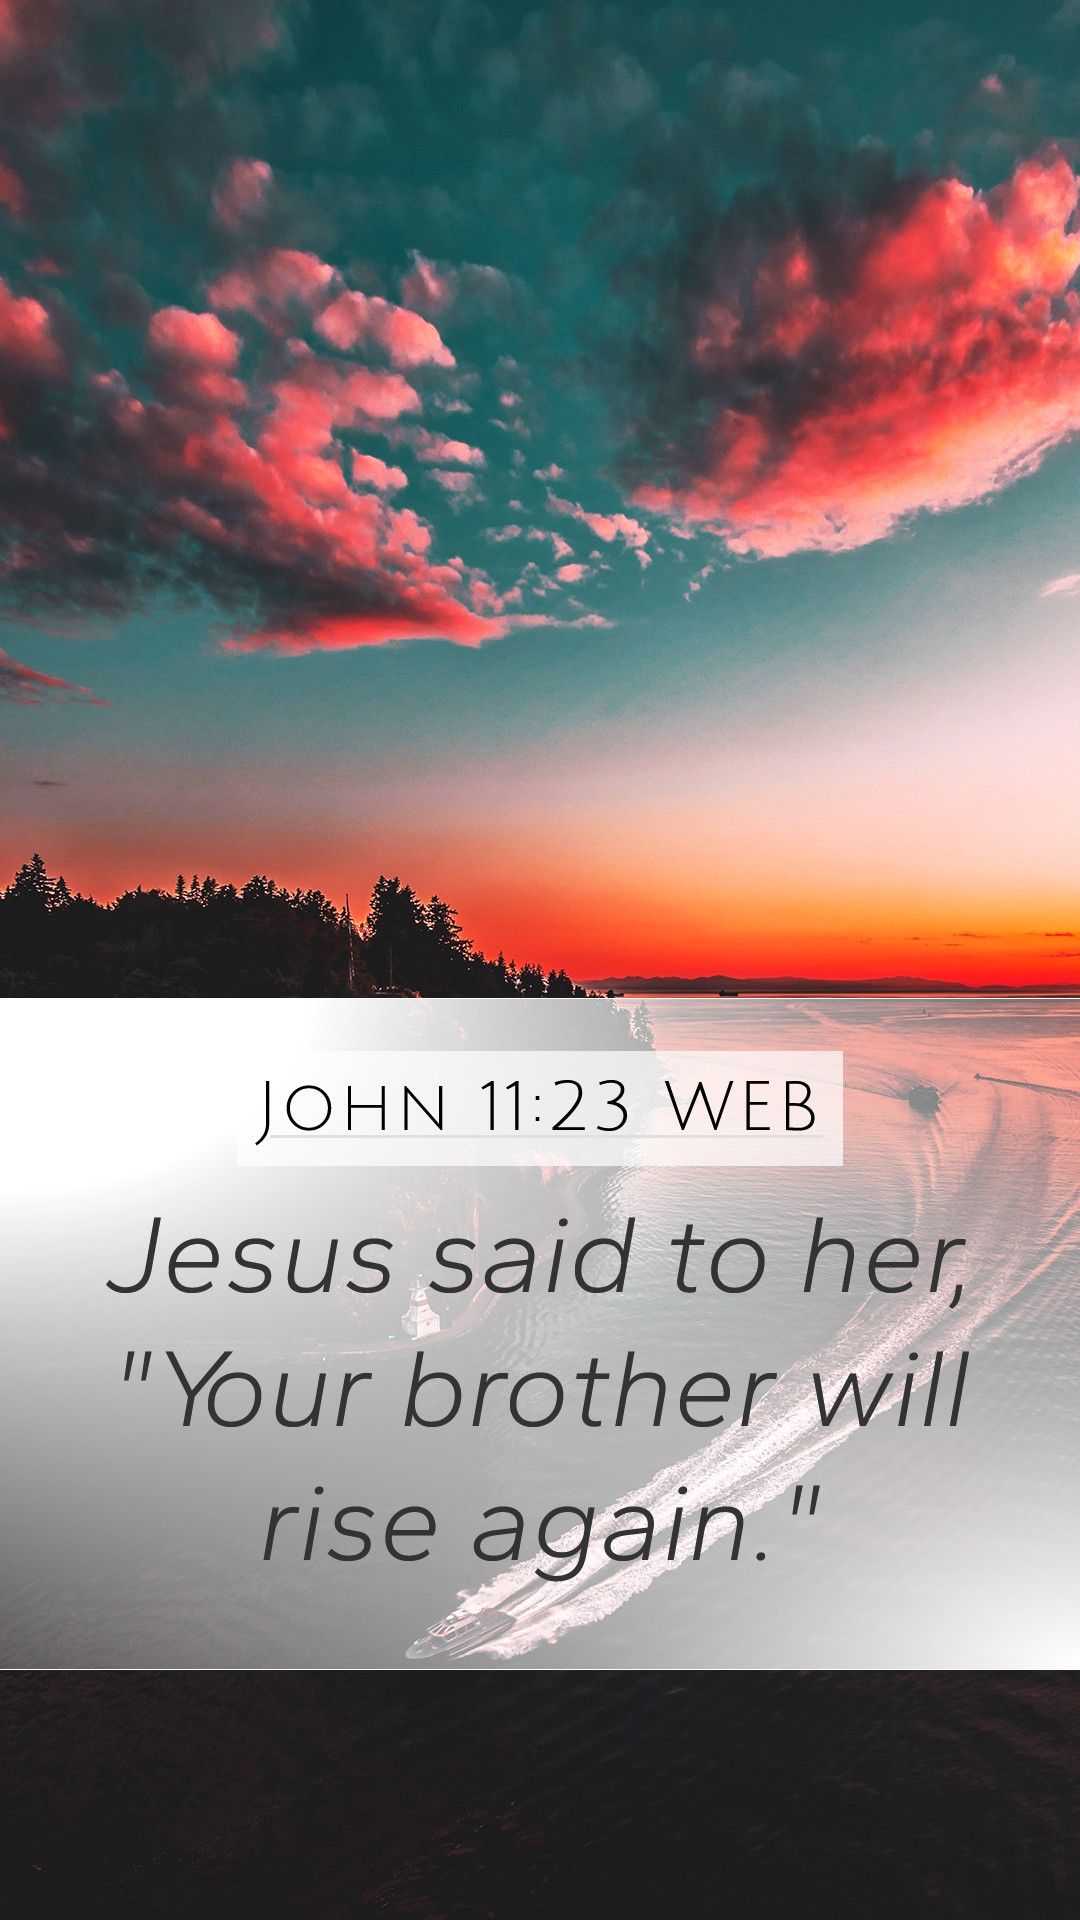 John 11:23 WEB Mobile Phone Wallpaper said to her, Your brother will rise